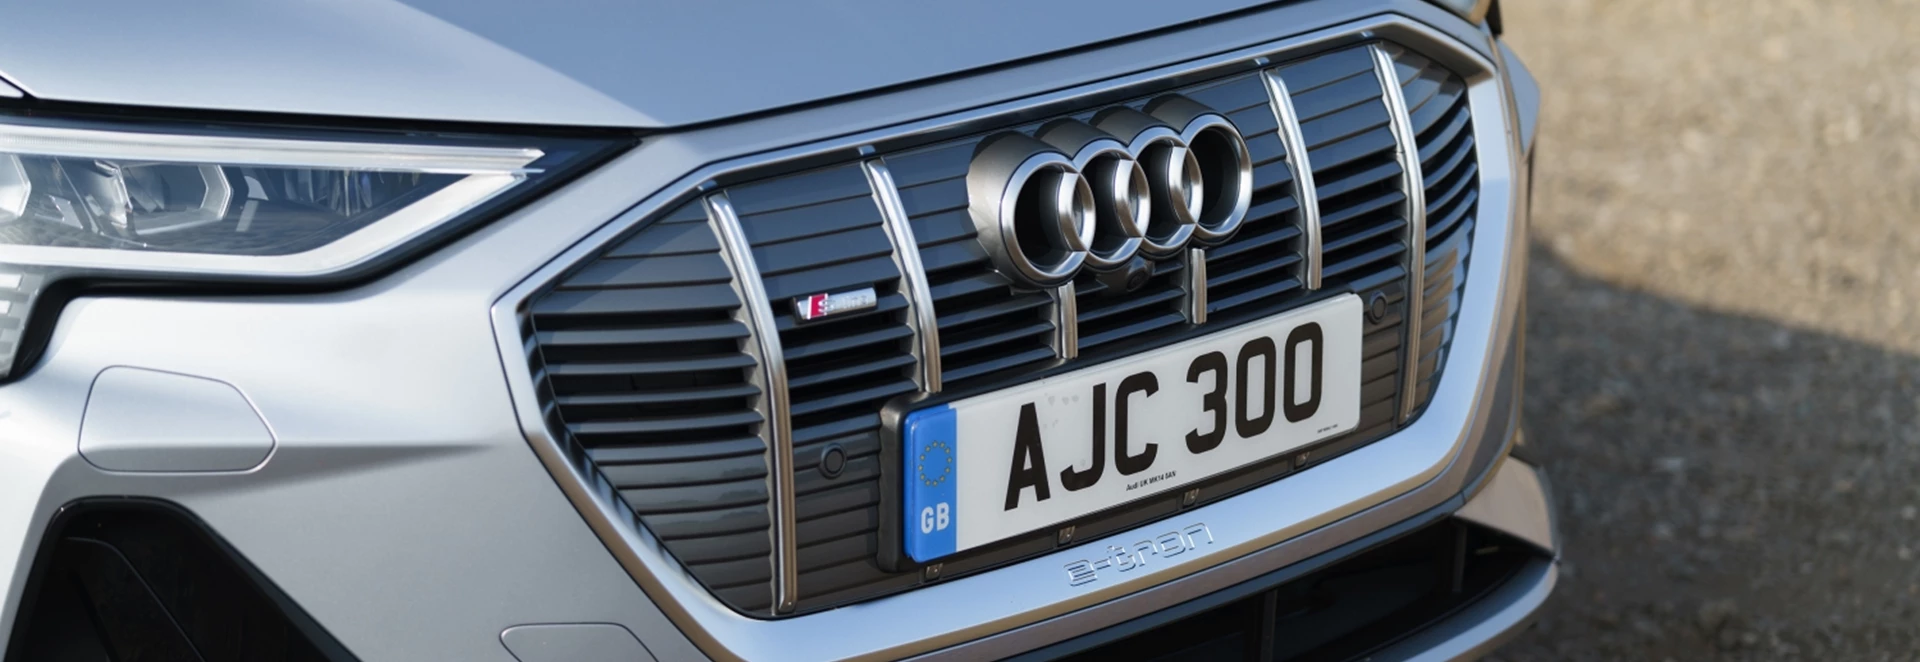 Audi set to introduce last new combustion engine in 2026 